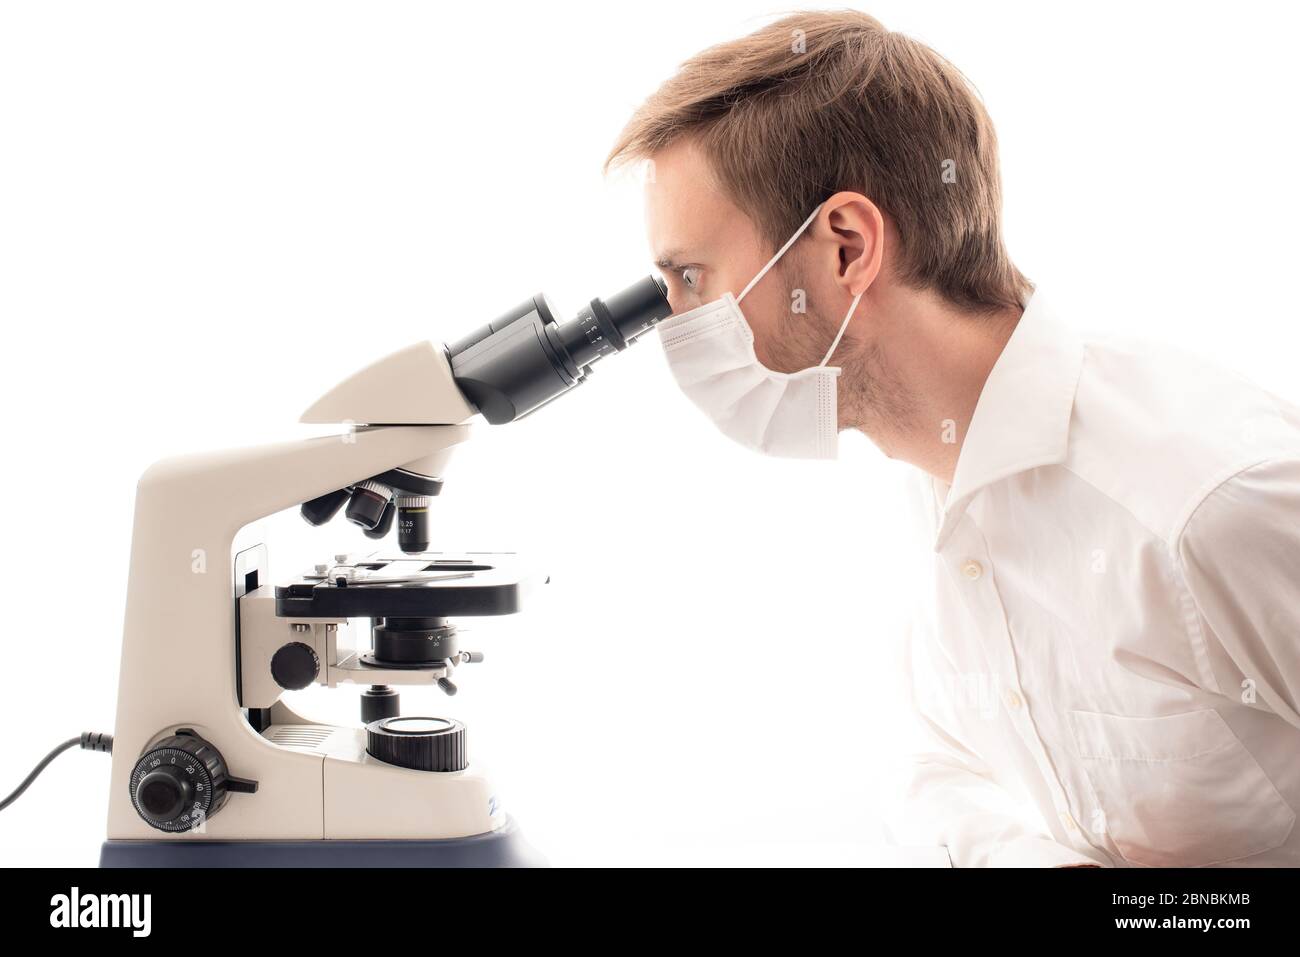 Profile photo of white male scientist using a binocular microscope, with a serious look to his eyes. Stock Photo